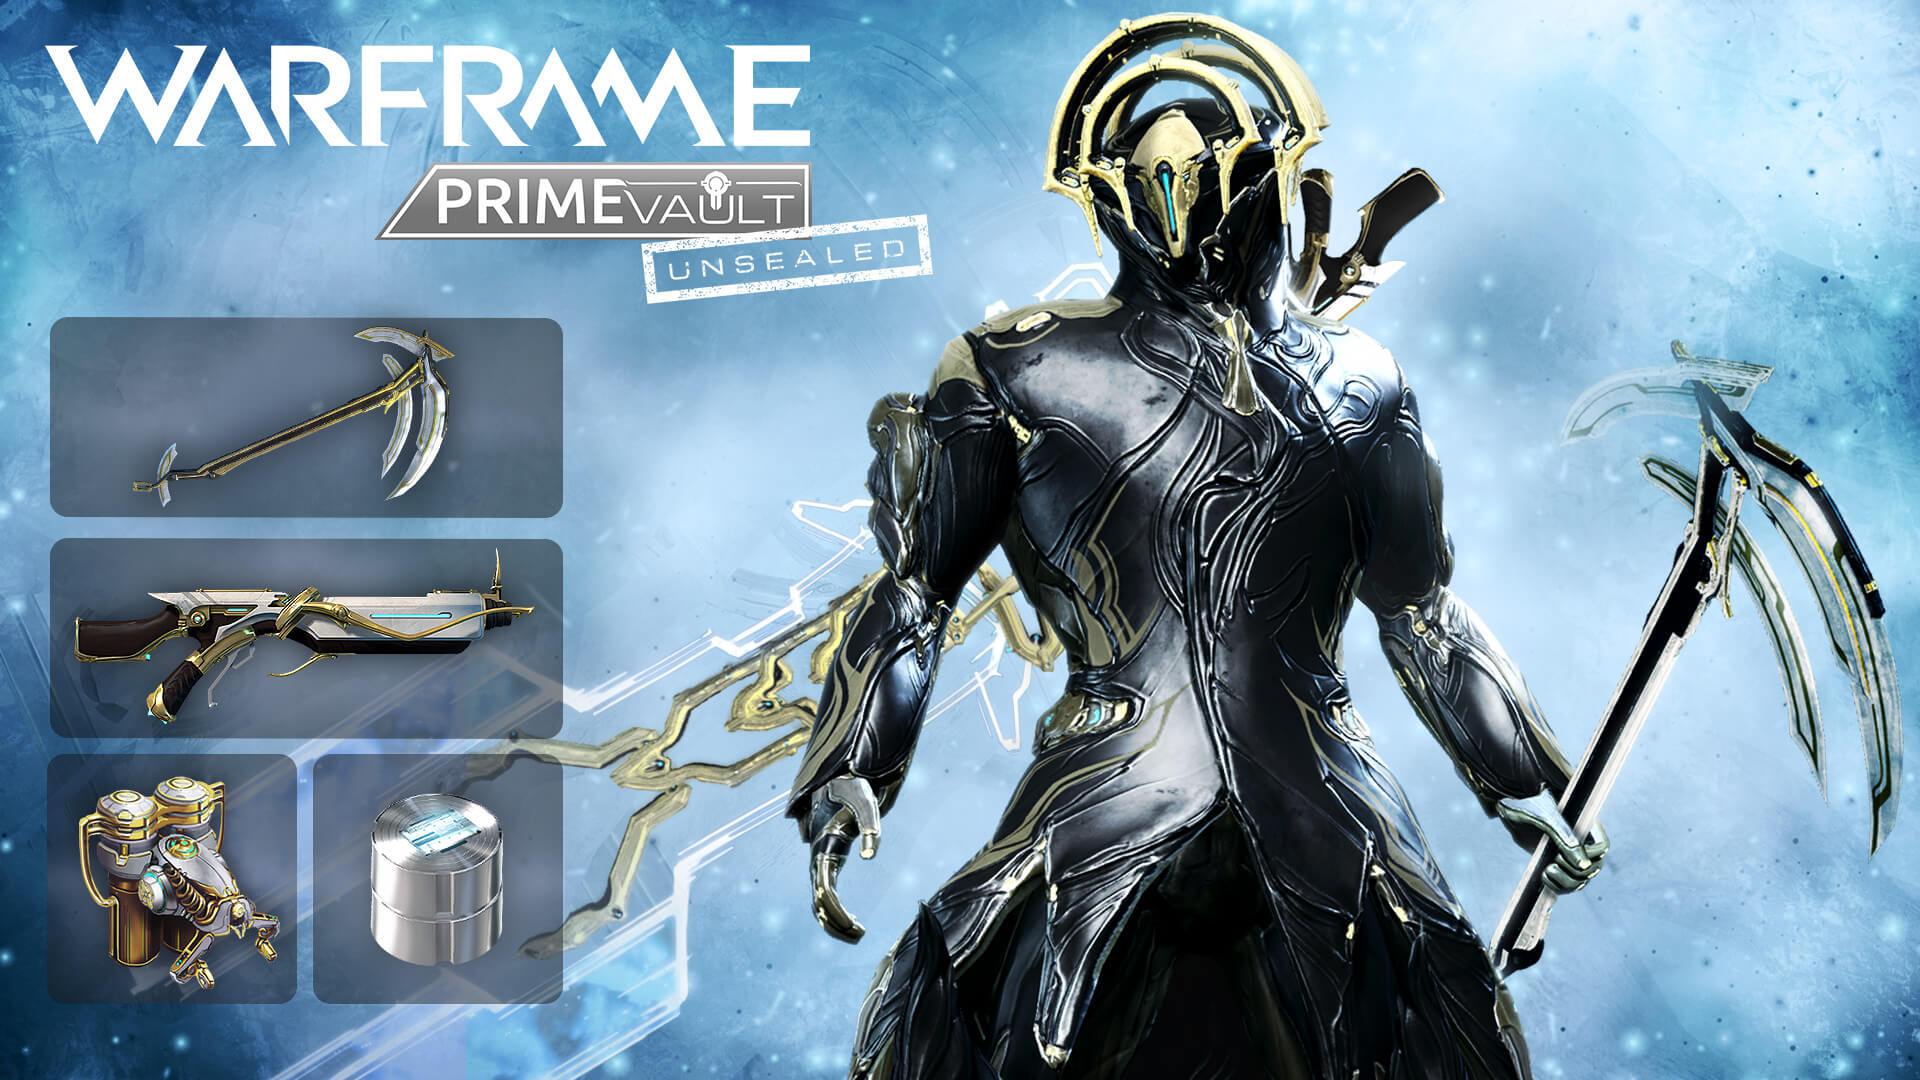 The Warframe Prime Vault opens to bring limited time Warframes